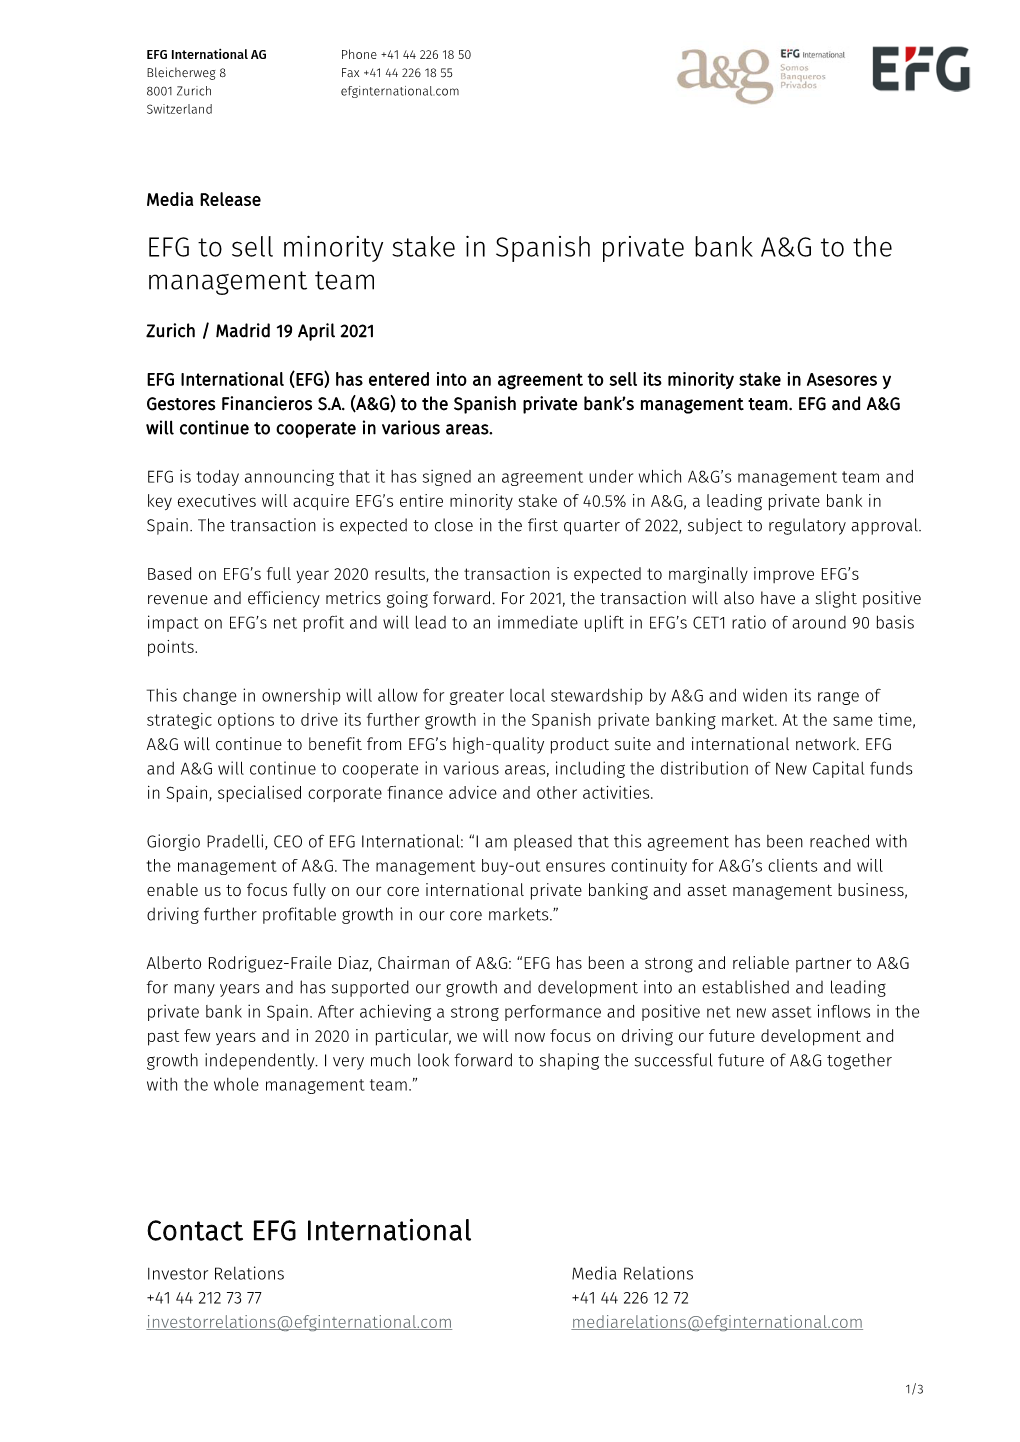 EFG to Sell Minority Stake in Spanish Private Bank A&G to the Management Team